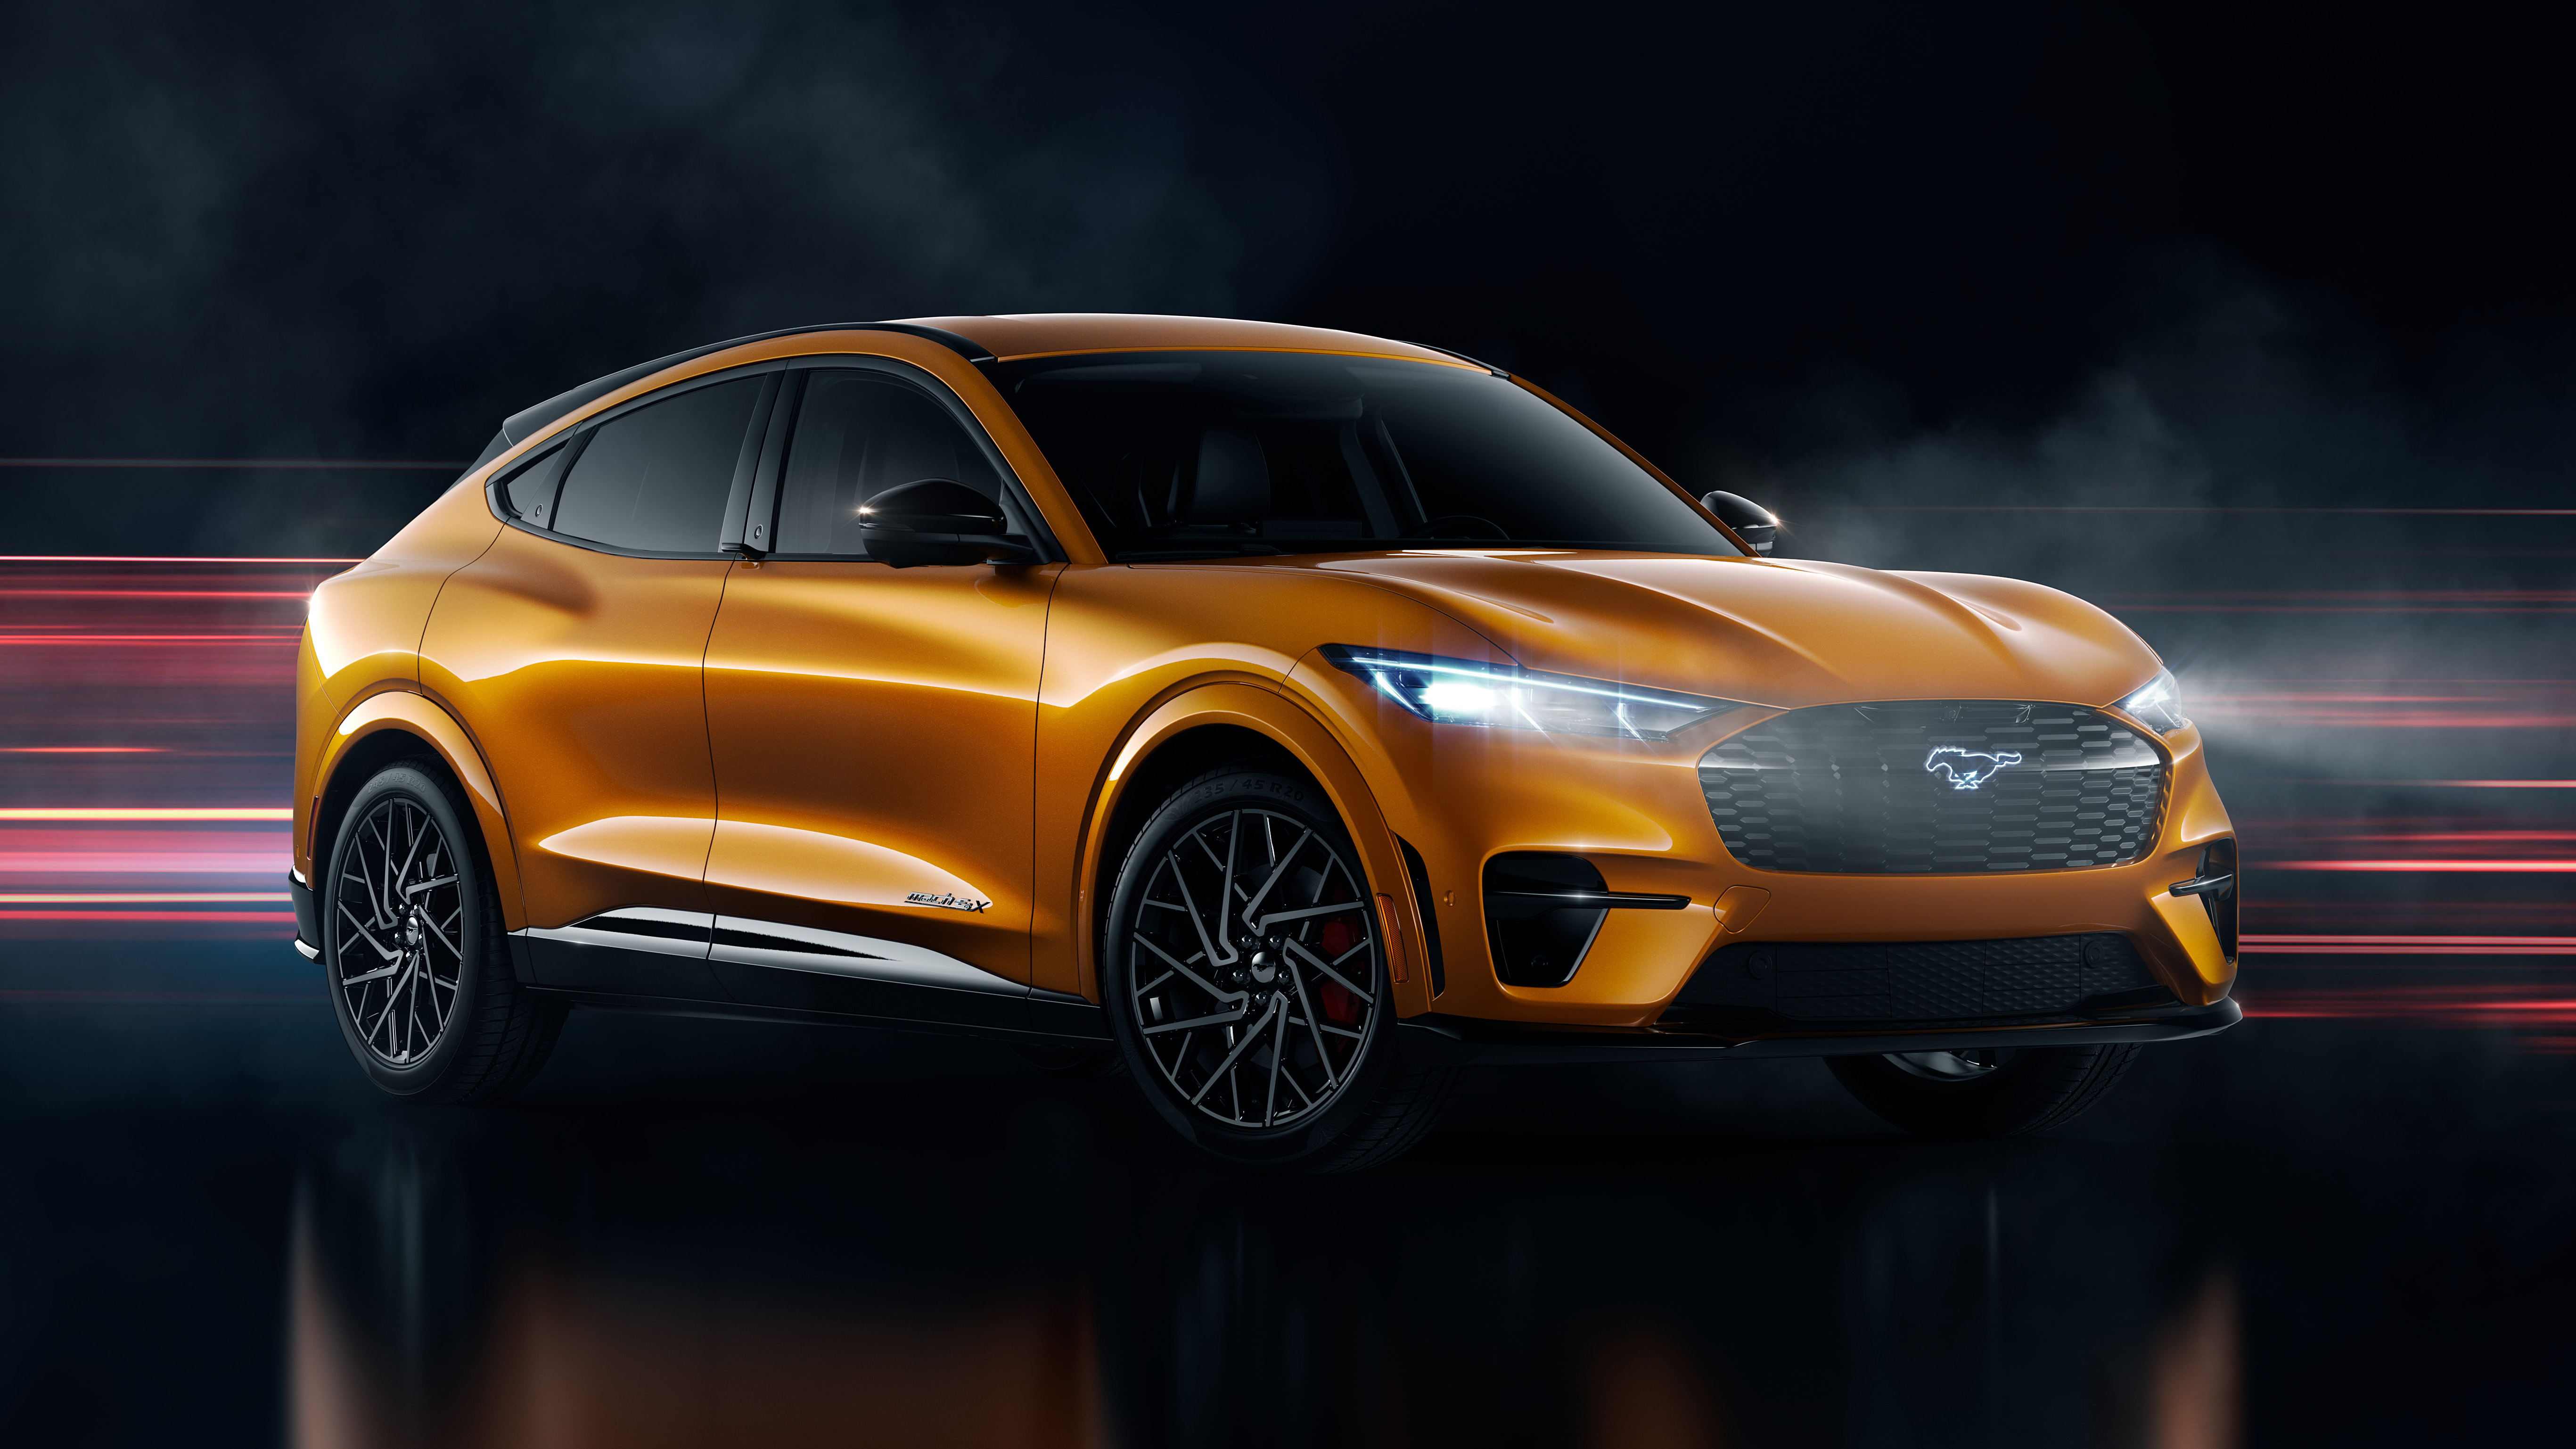 21 Ford Mustang Mach E Gets New Cyber Orange Color